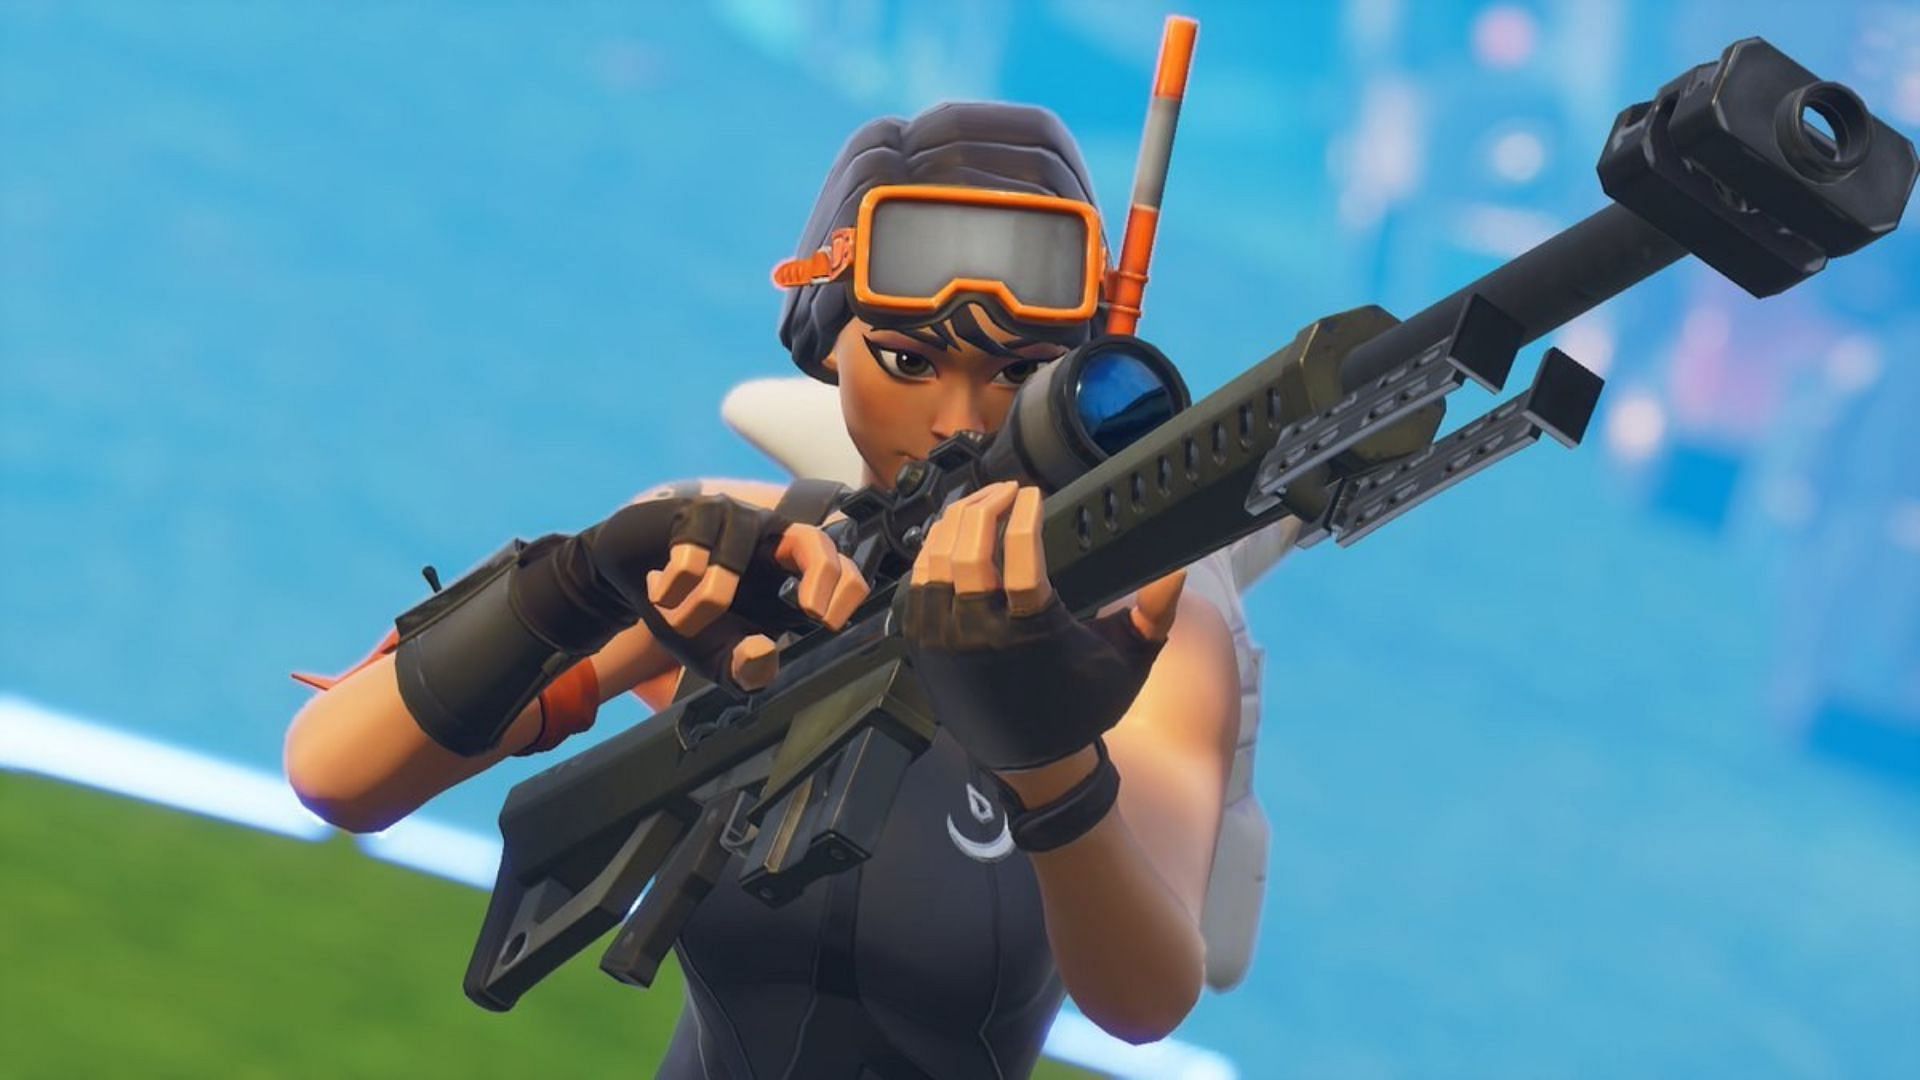 Aim assist in Fortnite is currently glitched in some situations (Image via Epic Games)